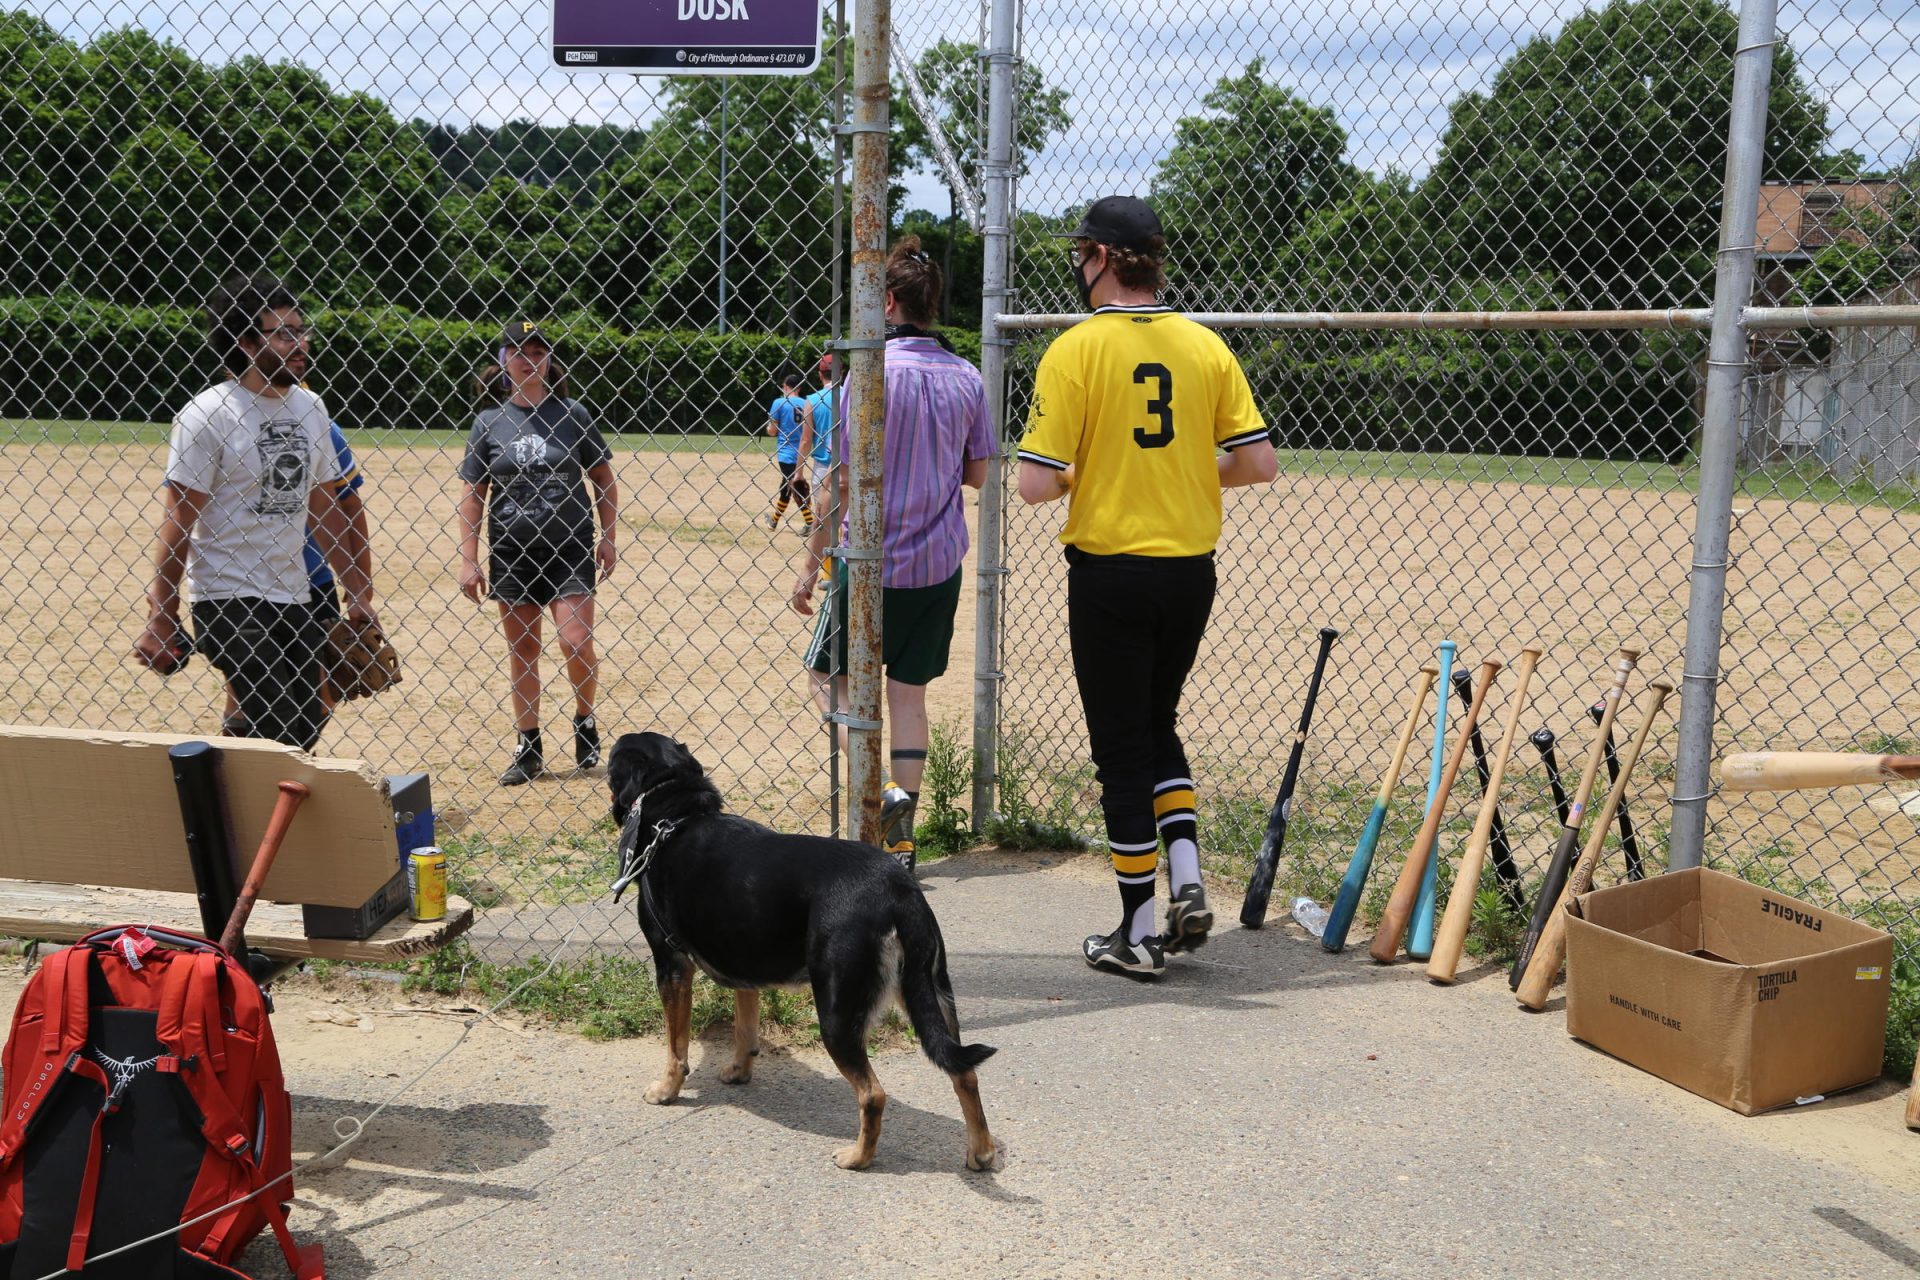 Dock Ellis League players take to the field on Sunday, June 12, 2020, as Bella the dog looks on.